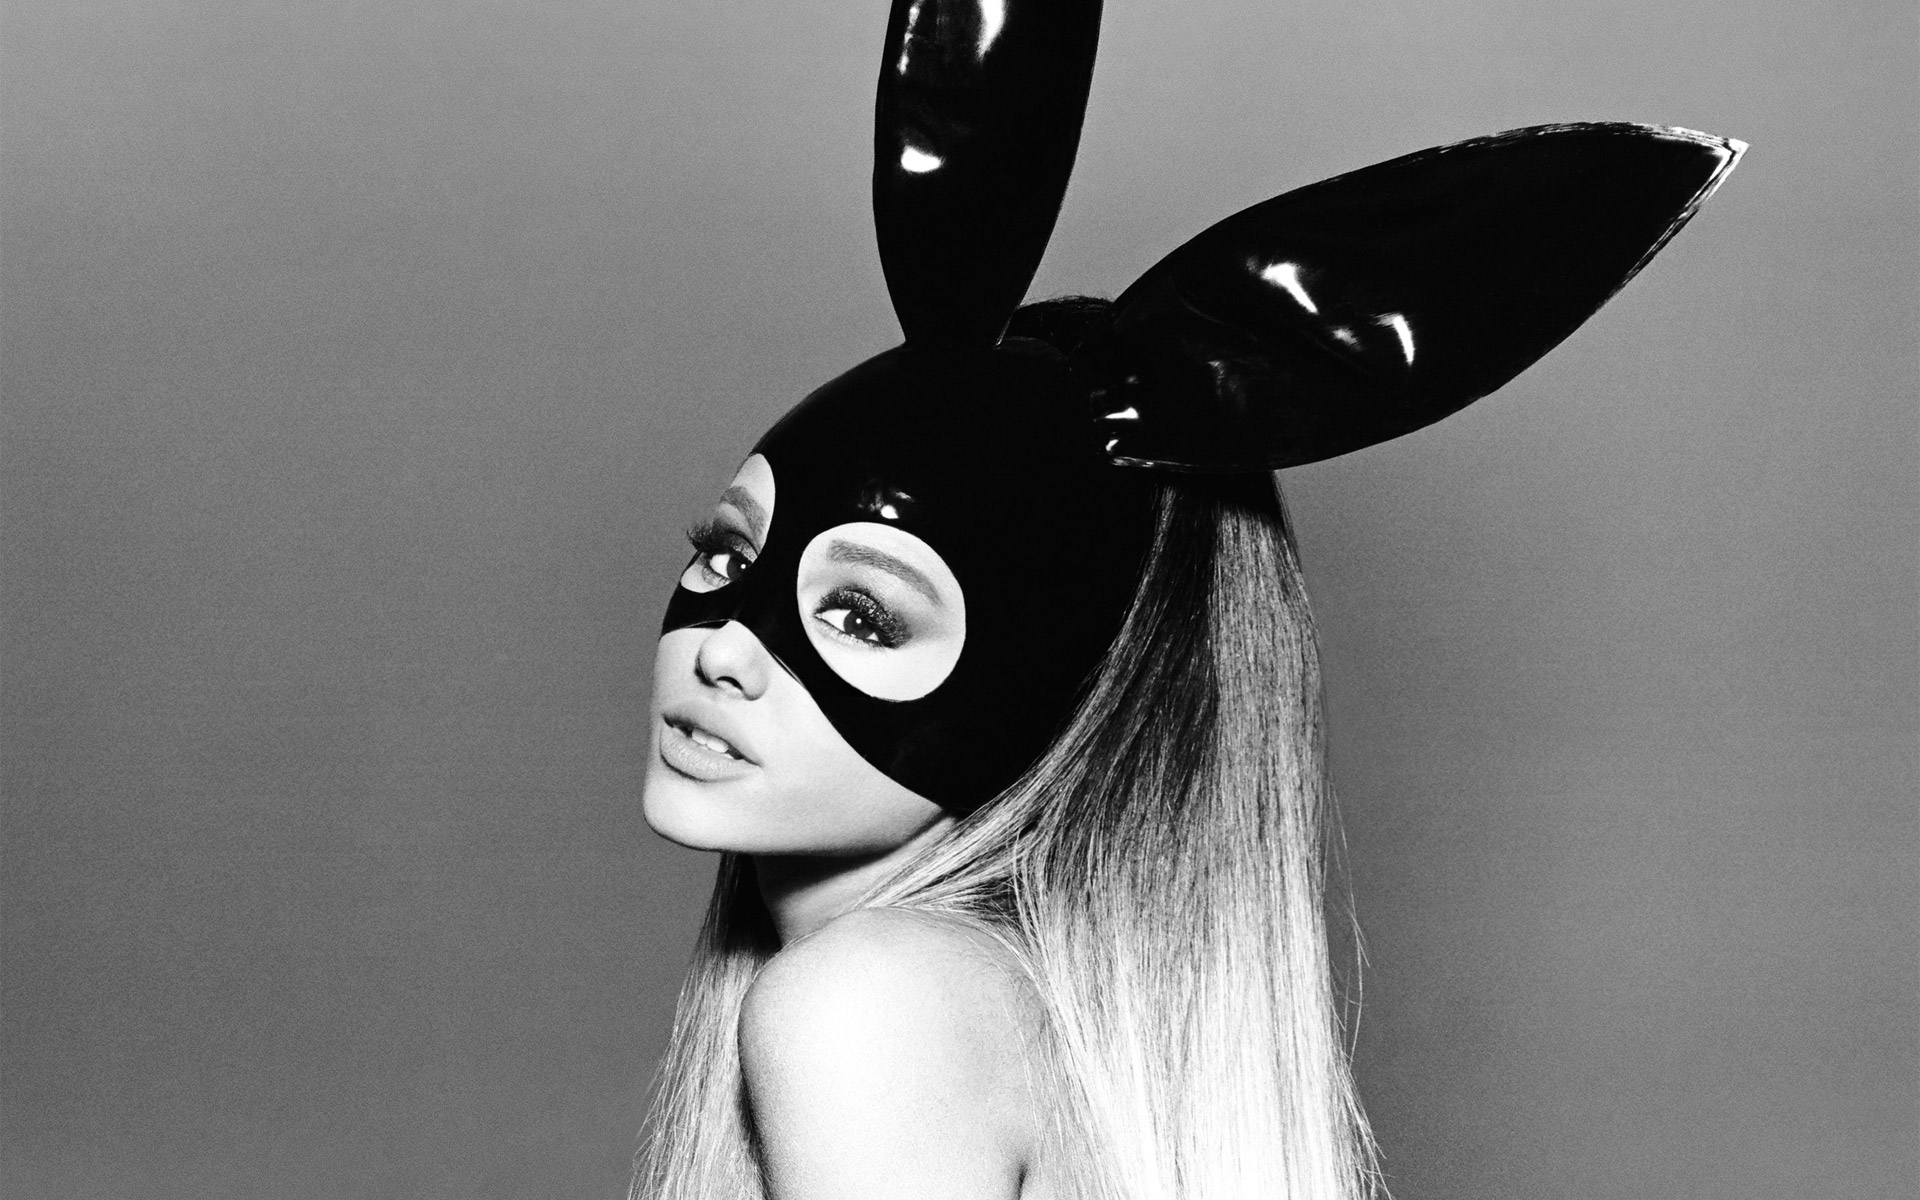 Ariana Grande on the cover of her album Dangerous Woman